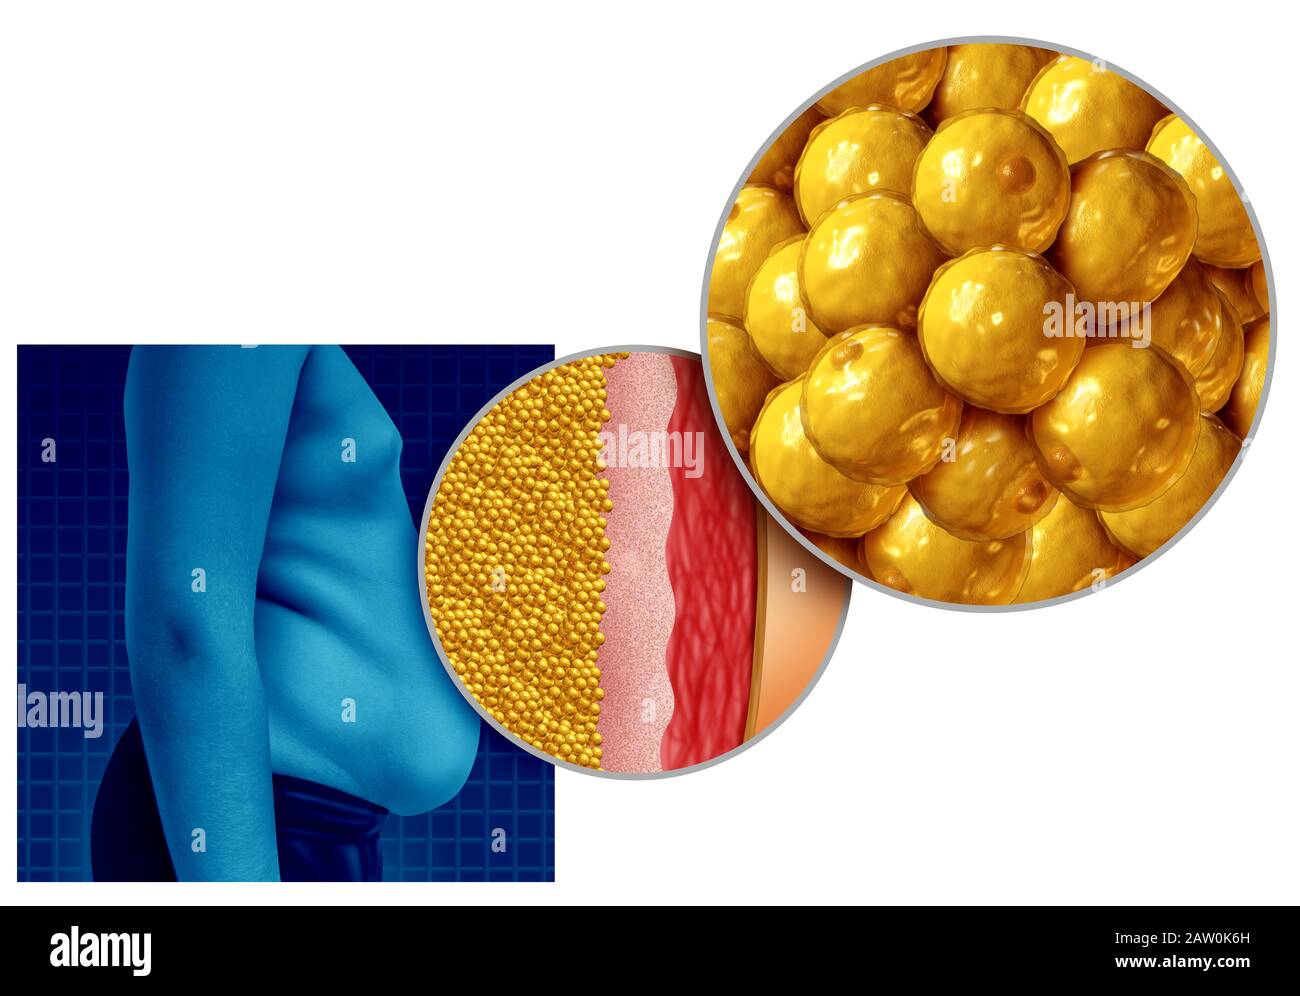 Belly fat anatomy and gaining weight or overweight people or obesity as a medical health concept as an increase in unhealthy nutrition. Stock Photo